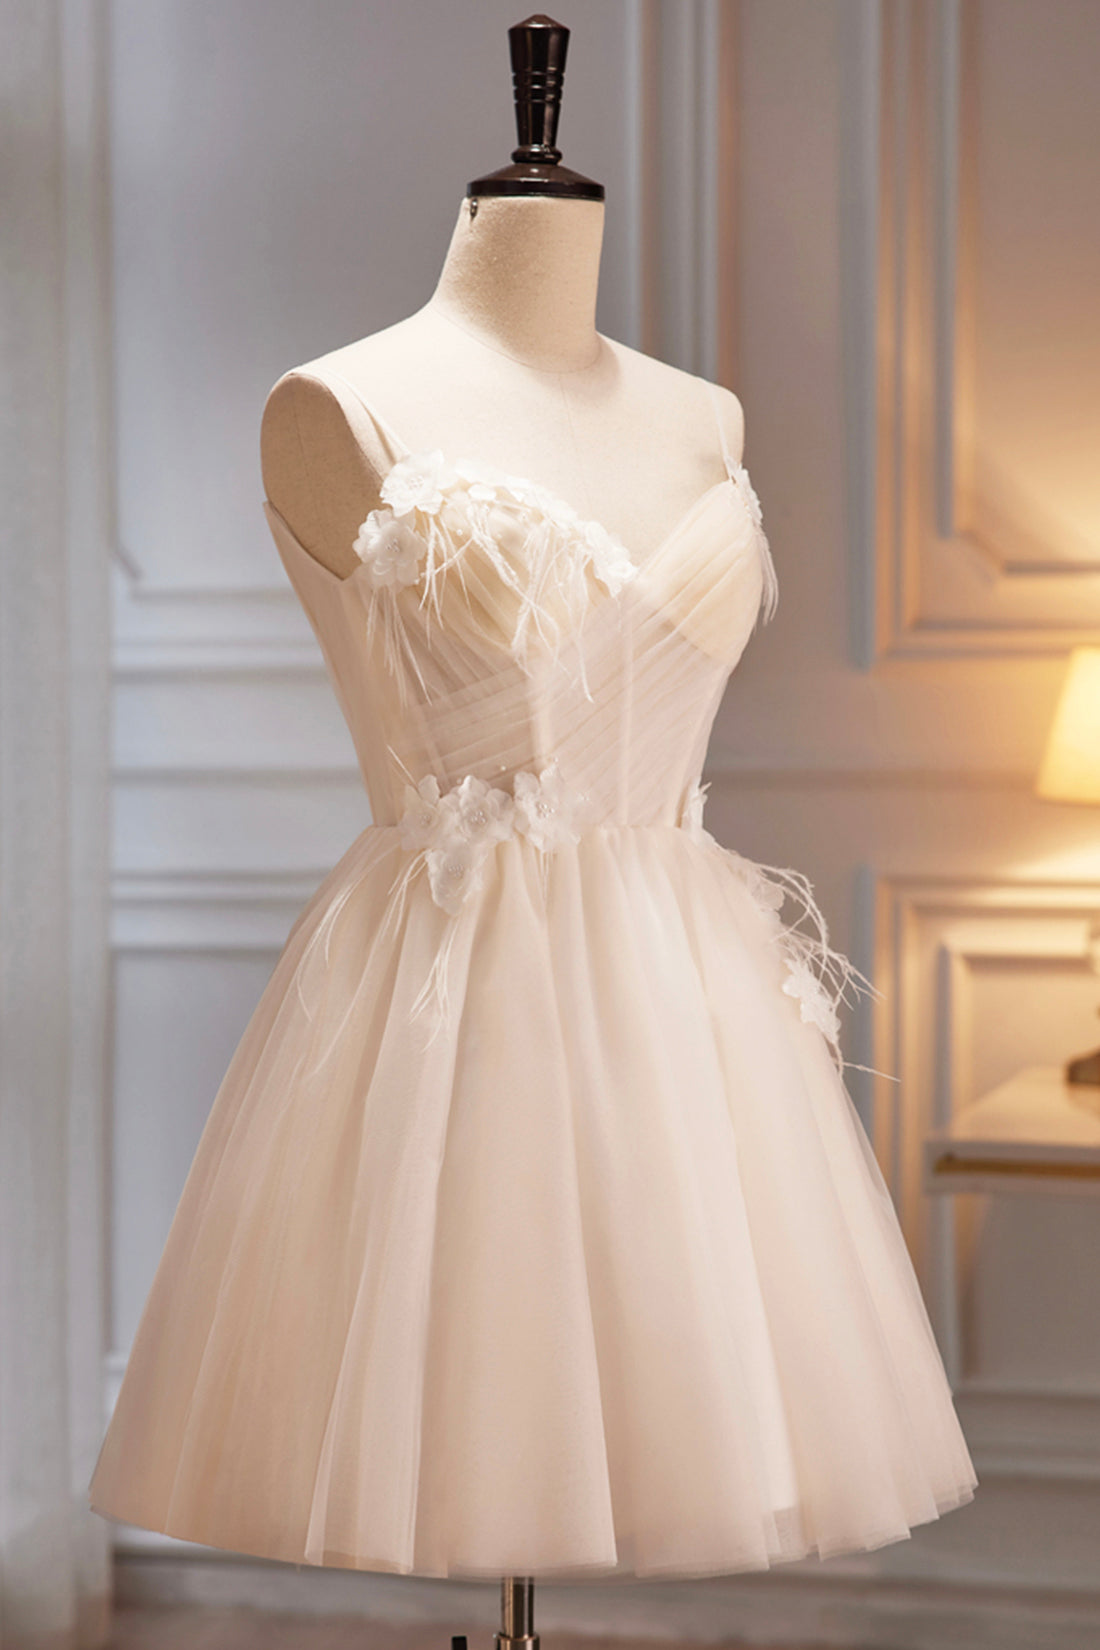 Bridesmaid Dress On Sale, Spaghetti Strap V Neck Tulle Short Prom Dress, Cute Champagne Homecoming Dress